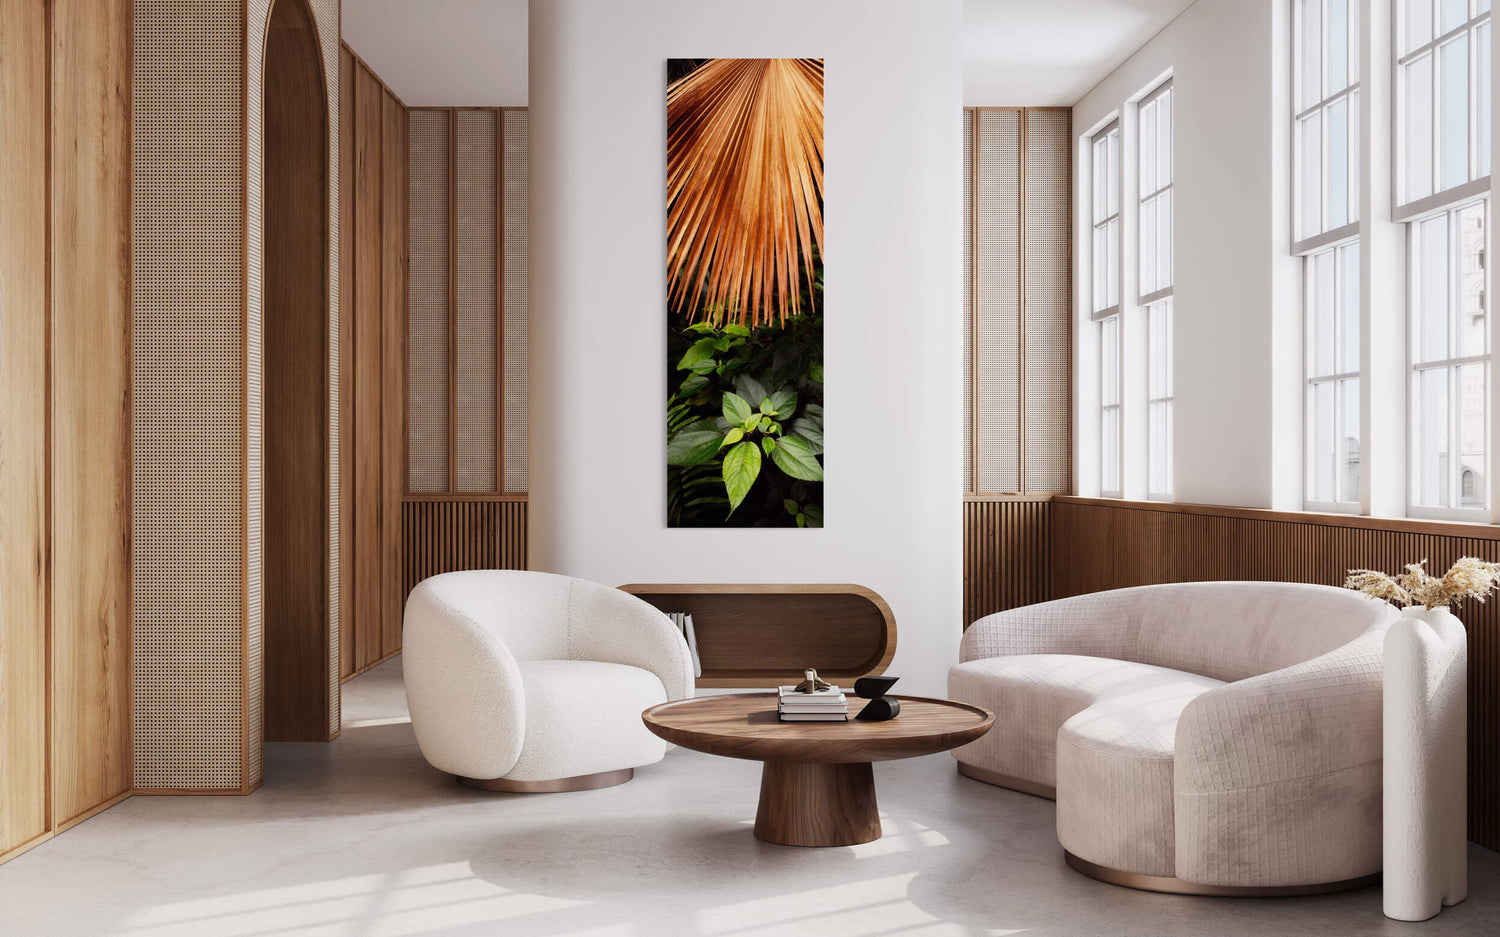 A Limahuli Garden picture from Kauai hangs in a living room.